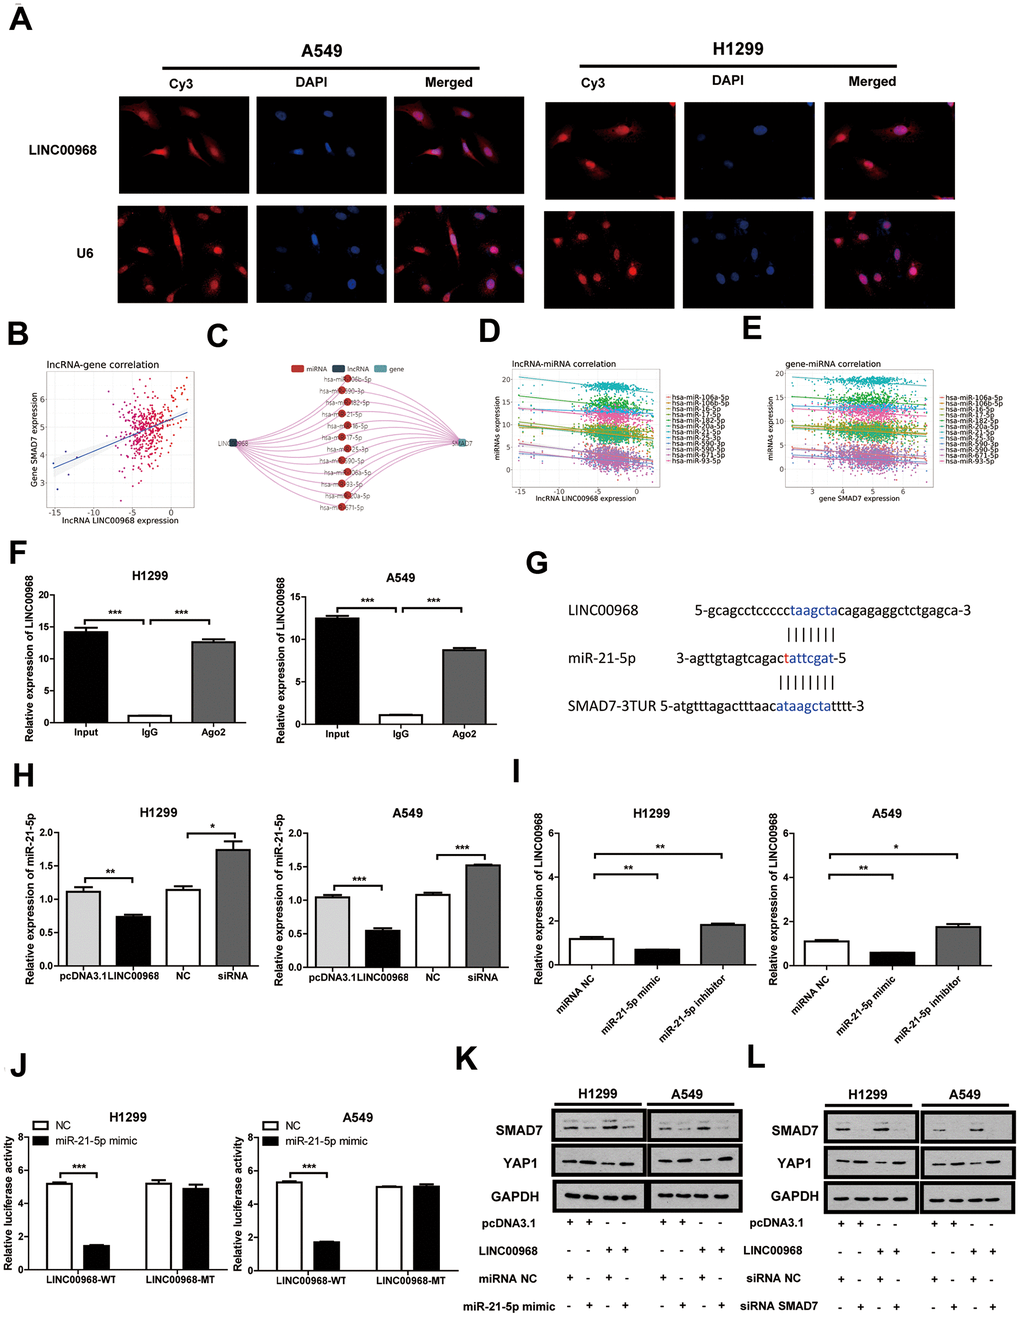 LINC00968 inhibits tumor development by regulating the miR-21-5p/SMAD7 axis. (A) FISH detection of subcellular localization of LINC00968 in A549 and H1299 cells. (B) The miRNACancerMAP datasets suggested that there was a significant positive correlation between LINC00968 and SMAD7. (C) The miRNAs negatively related to LINC00968 and SMAD7 most frequently were summarized by miRNACancerMAP. (D) Correlation between LINC00968 and the top 12 most frequent miRNAs. (E) Correlation between SMAD7 and the top 12 most frequent miRNAs. (F) qRT-PCR quantification of LINC00968. LINC00968 was more enriched in the cells treated with the Ago2 antibody compared with those treated with the IgG negative control antibody. (G) The complementary sites of LINC00968, miR-21-5p, and SMAD7. (H) The expression of miR-21-5p was decreased and increased in LINC00968 overexpressing and knockdown LUAD cells, respectively. (I) LINC00968 expression was decreased in the miR-21-5p mimics group and increased in the miR-21-5p inhibitor group. (J) H1299 and A549 cells co-transfected with a miR-21-5p mimic or negative control (NC) and luciferase vectors containing either wild type (LINC00968-WT) or mutated (LINC00968-mut) miR-21-5p-binding sites. The luciferase activity was measured after 48 h. (K) and (L) SMAD7 and YAP1 protein expression following LINC00968, SMAD7 and/or miR-21-5p modulation in A549 and H1299 cells. *PPP